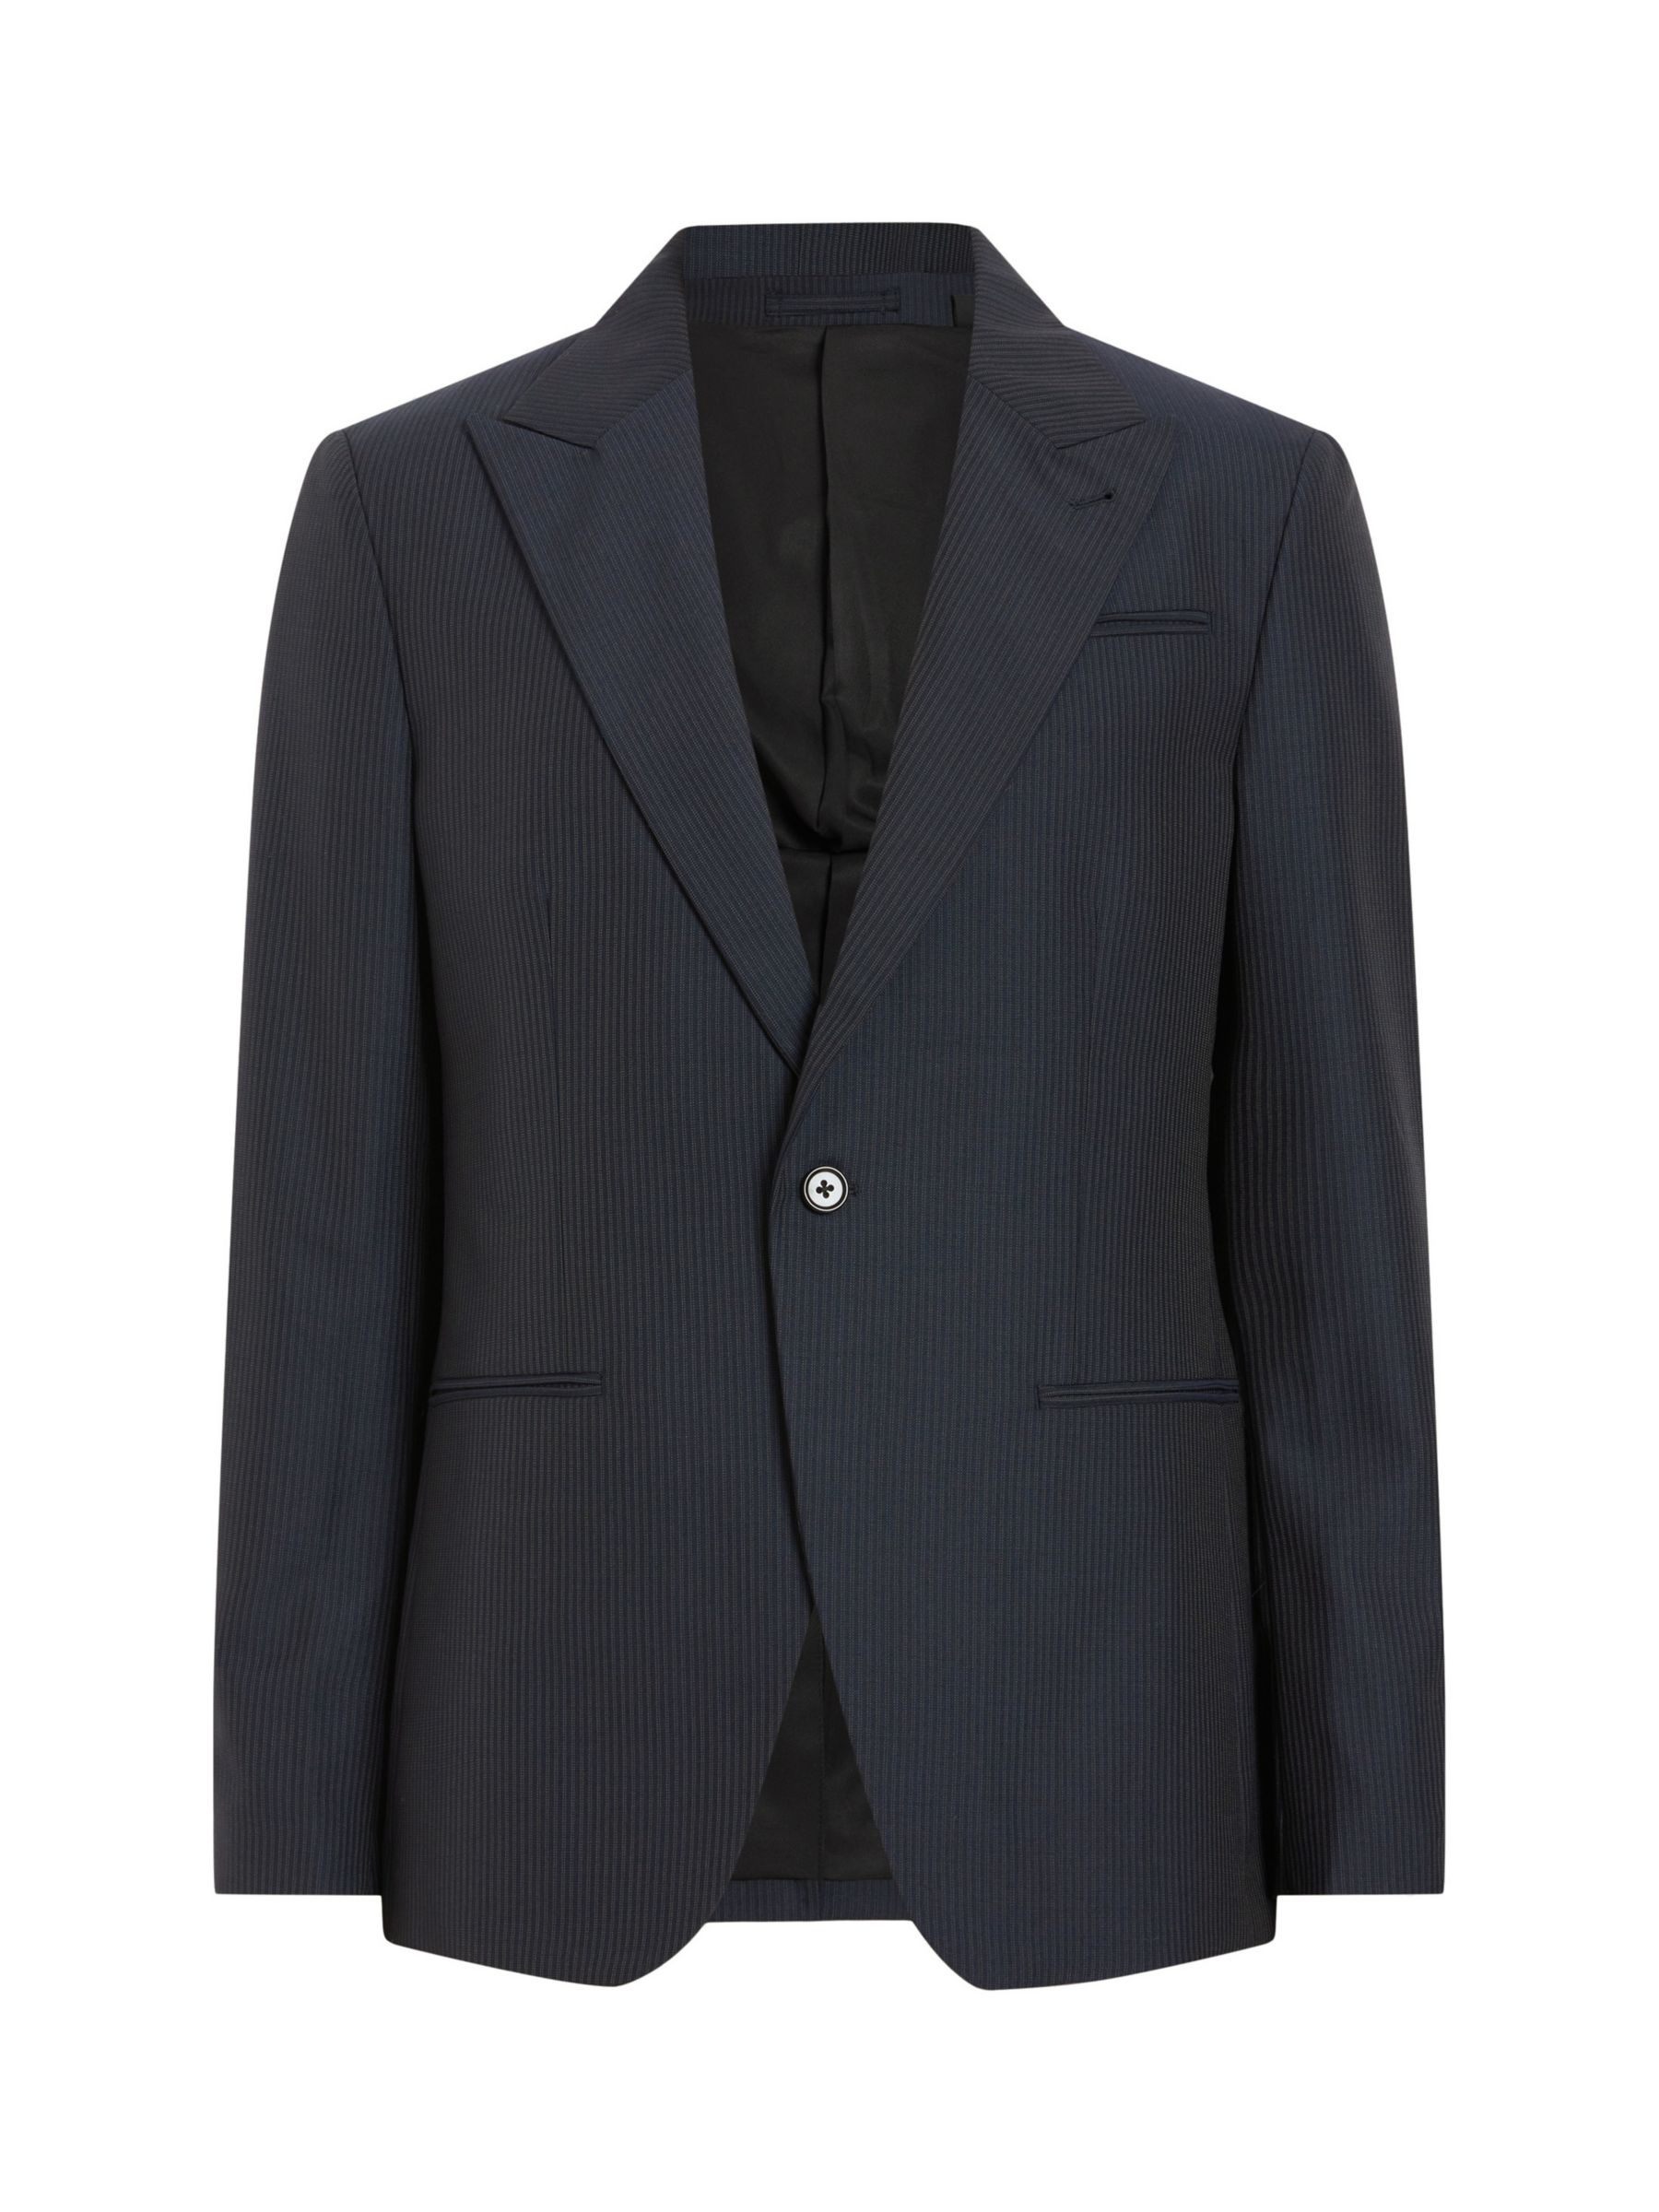 Buy AllSaints Howling Relaxed Fit Wool Blend Suit Jacket, Ink Blue Online at johnlewis.com